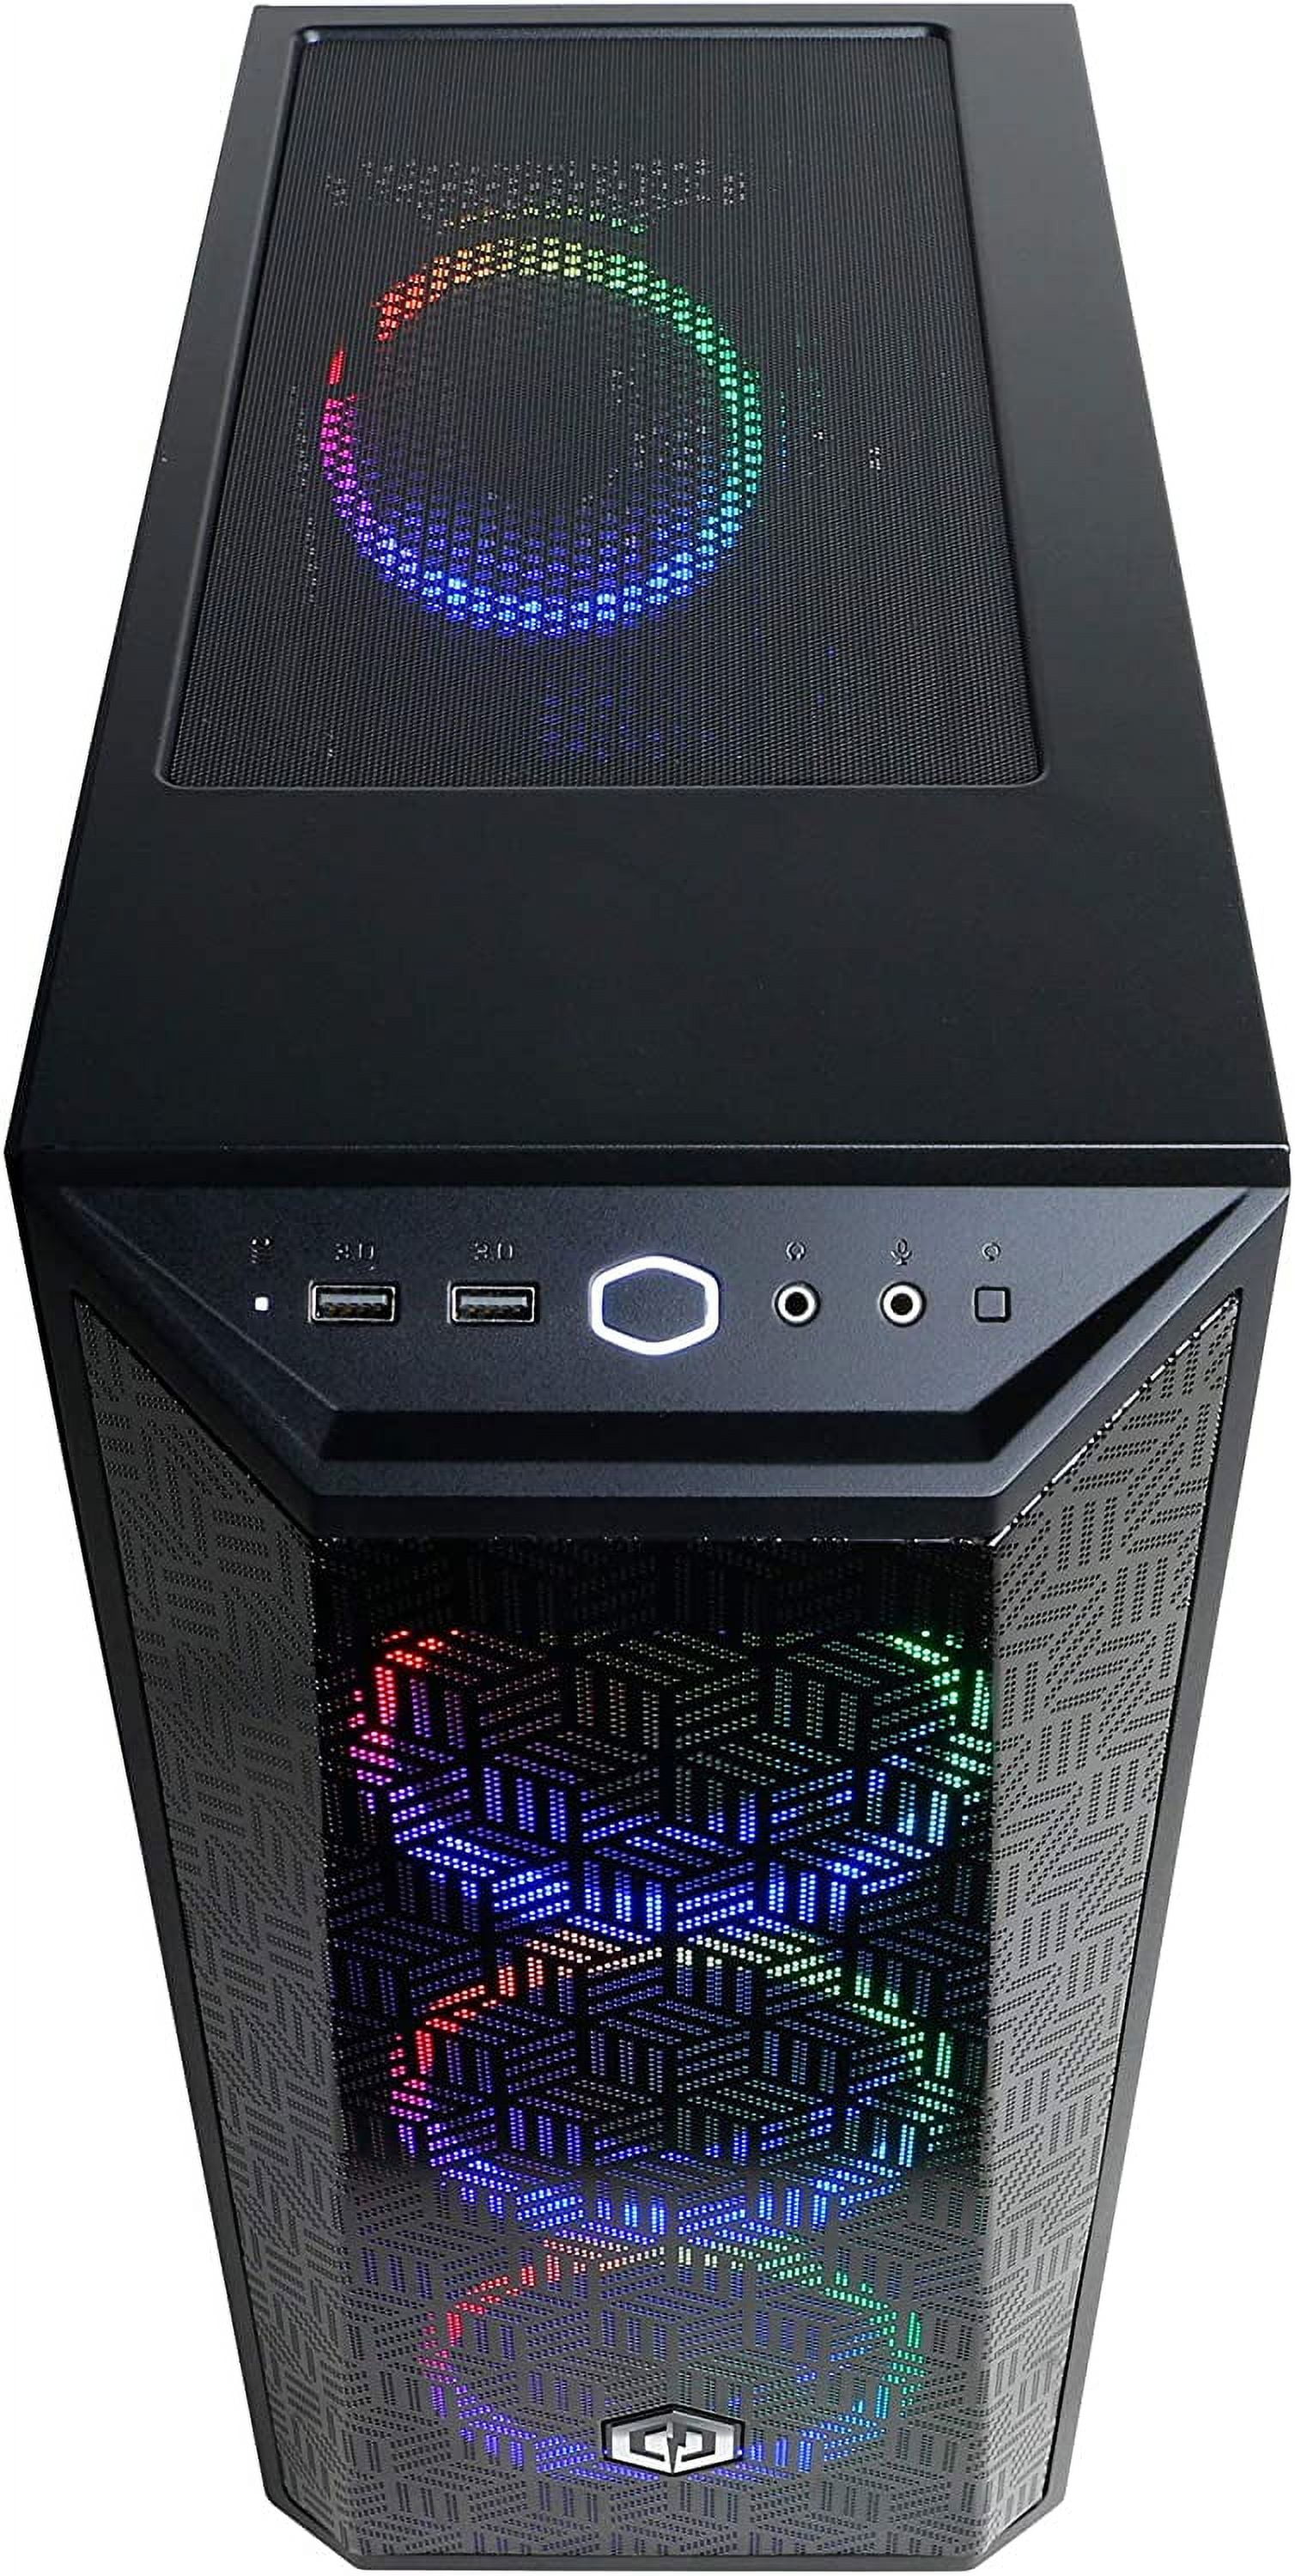 PC Gamer complet Nitropc Pack Silver Plus - Intel i5-11400F, RX